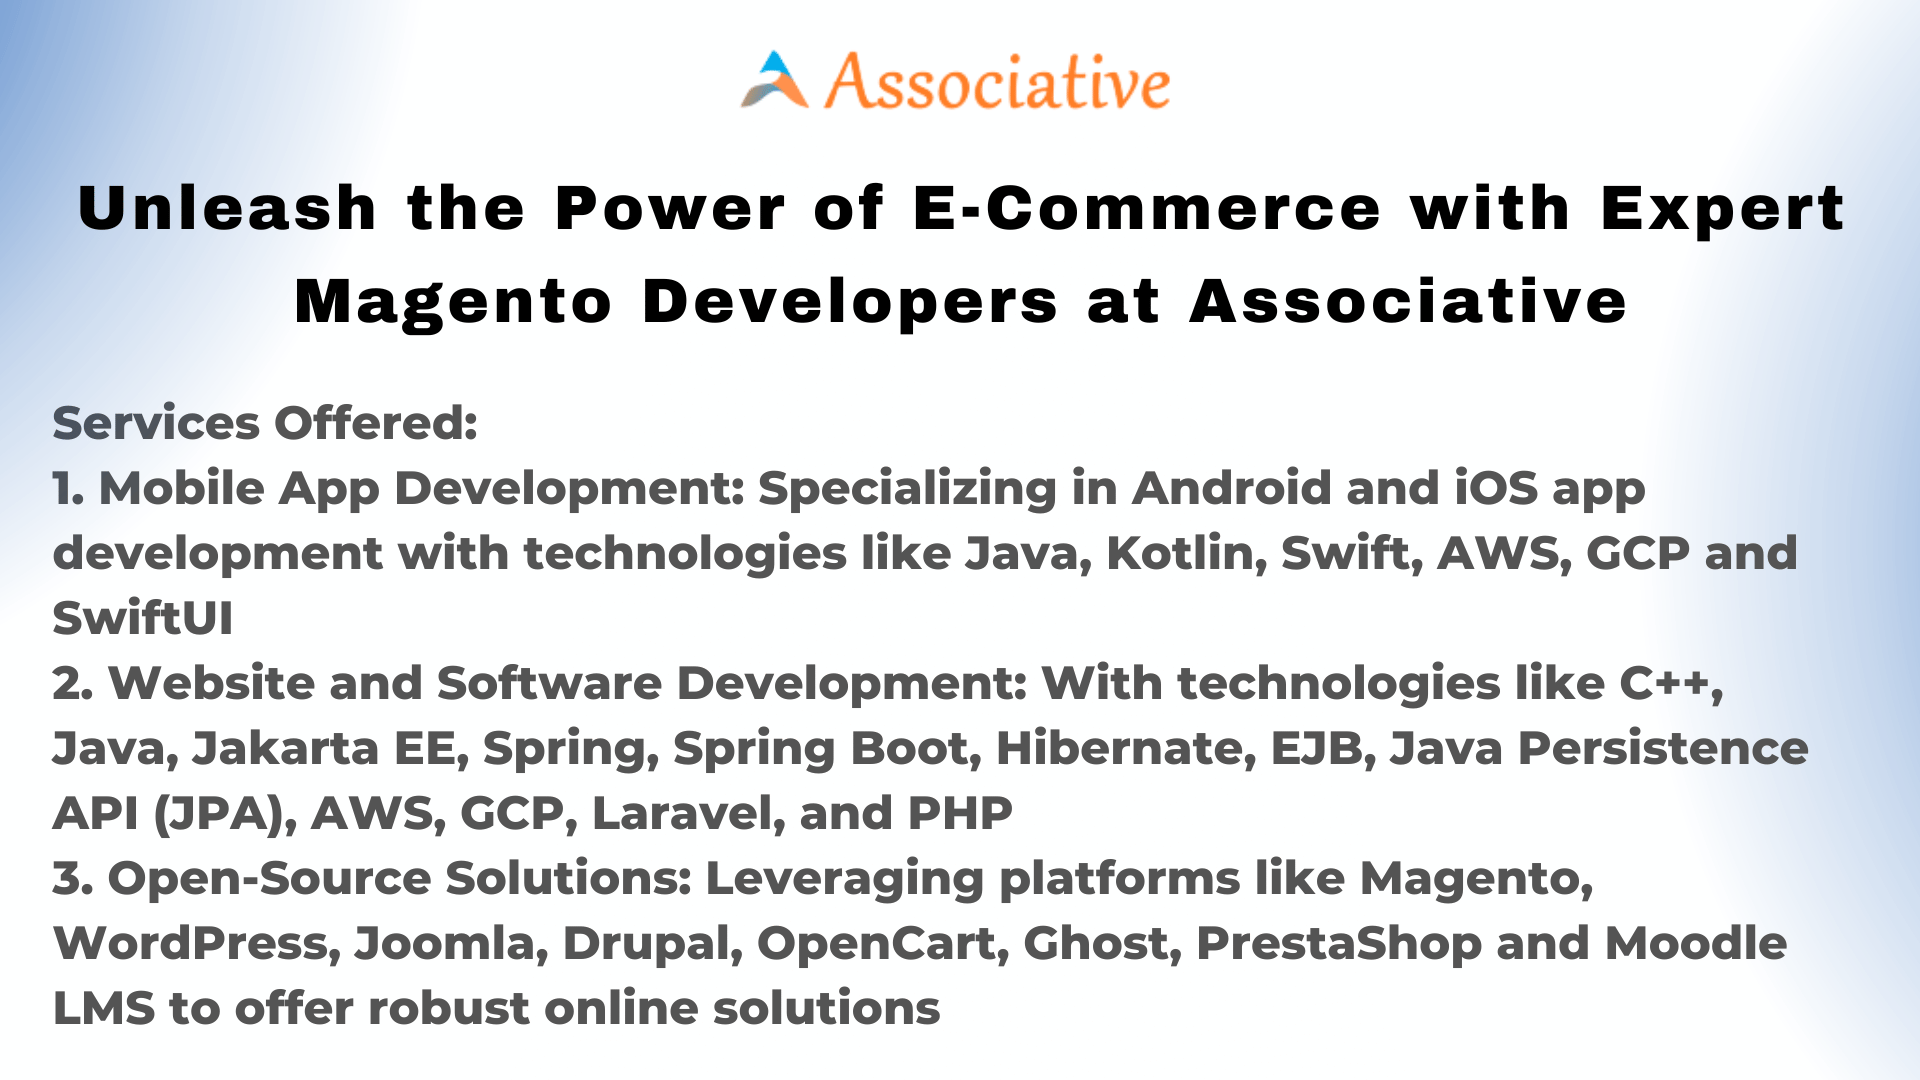 Unleash the Power of E-Commerce with Expert Magento Developers at Associative